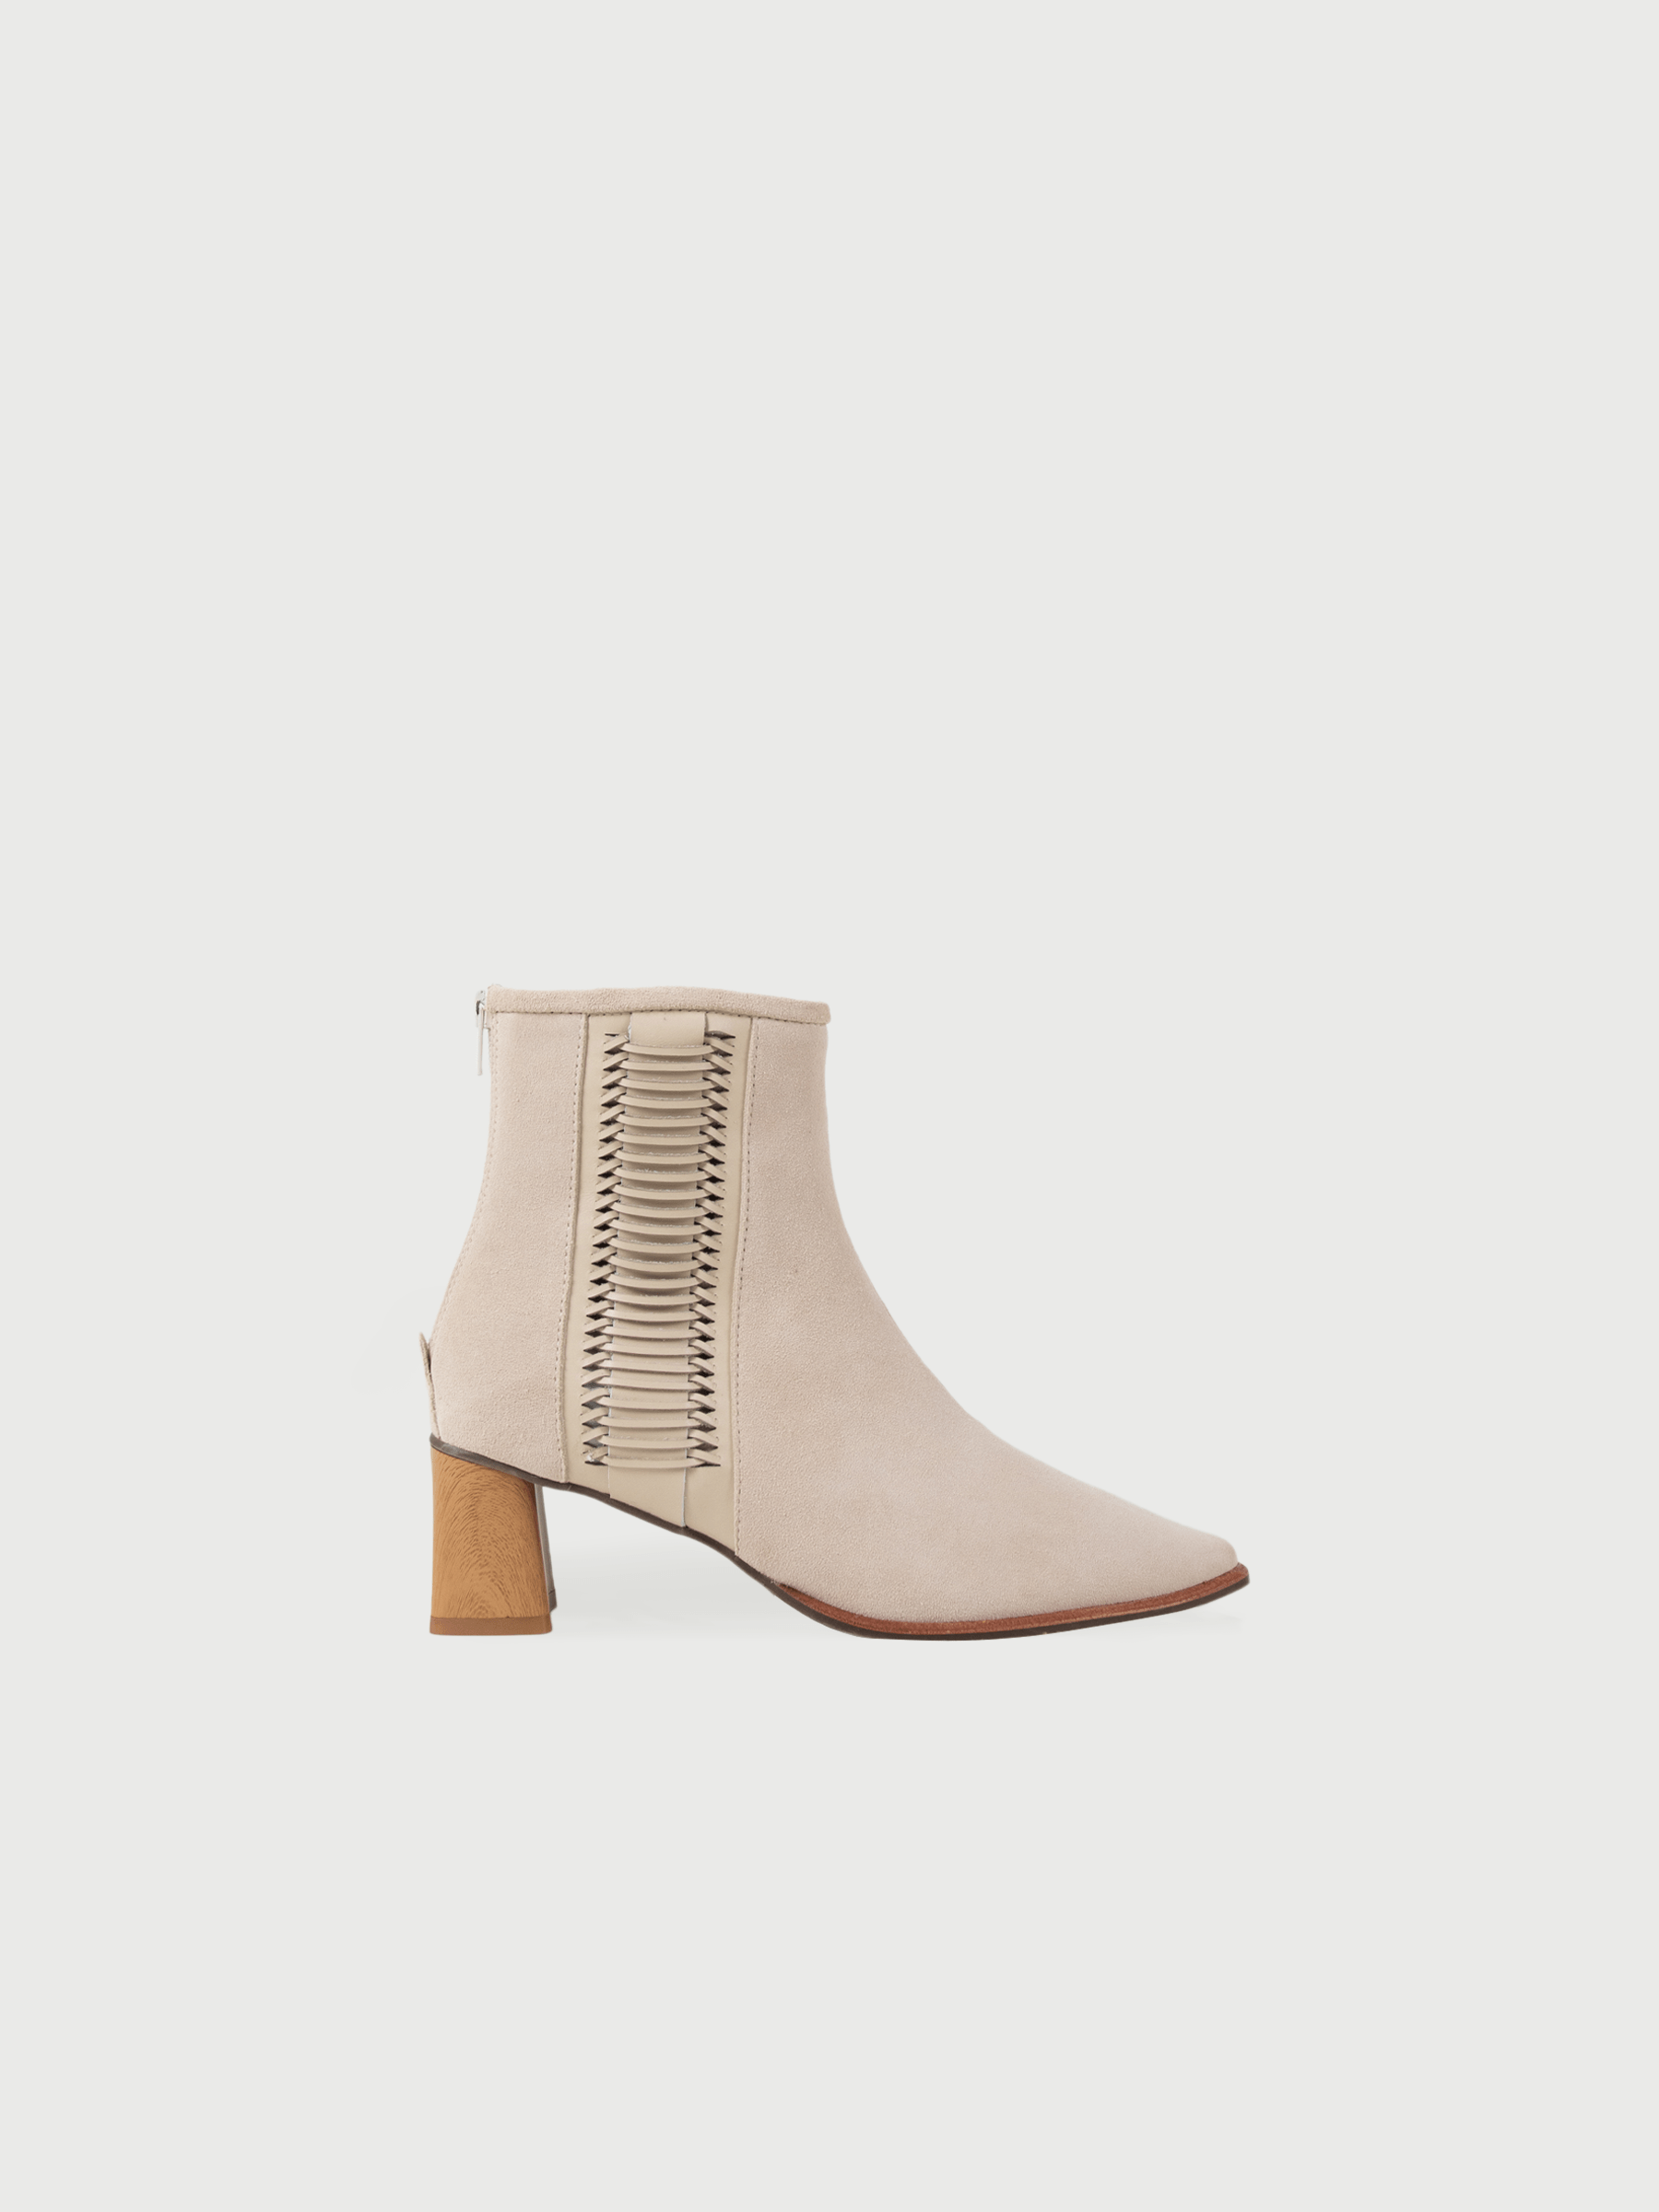 Wooden-Heel Suede Ankle Boots